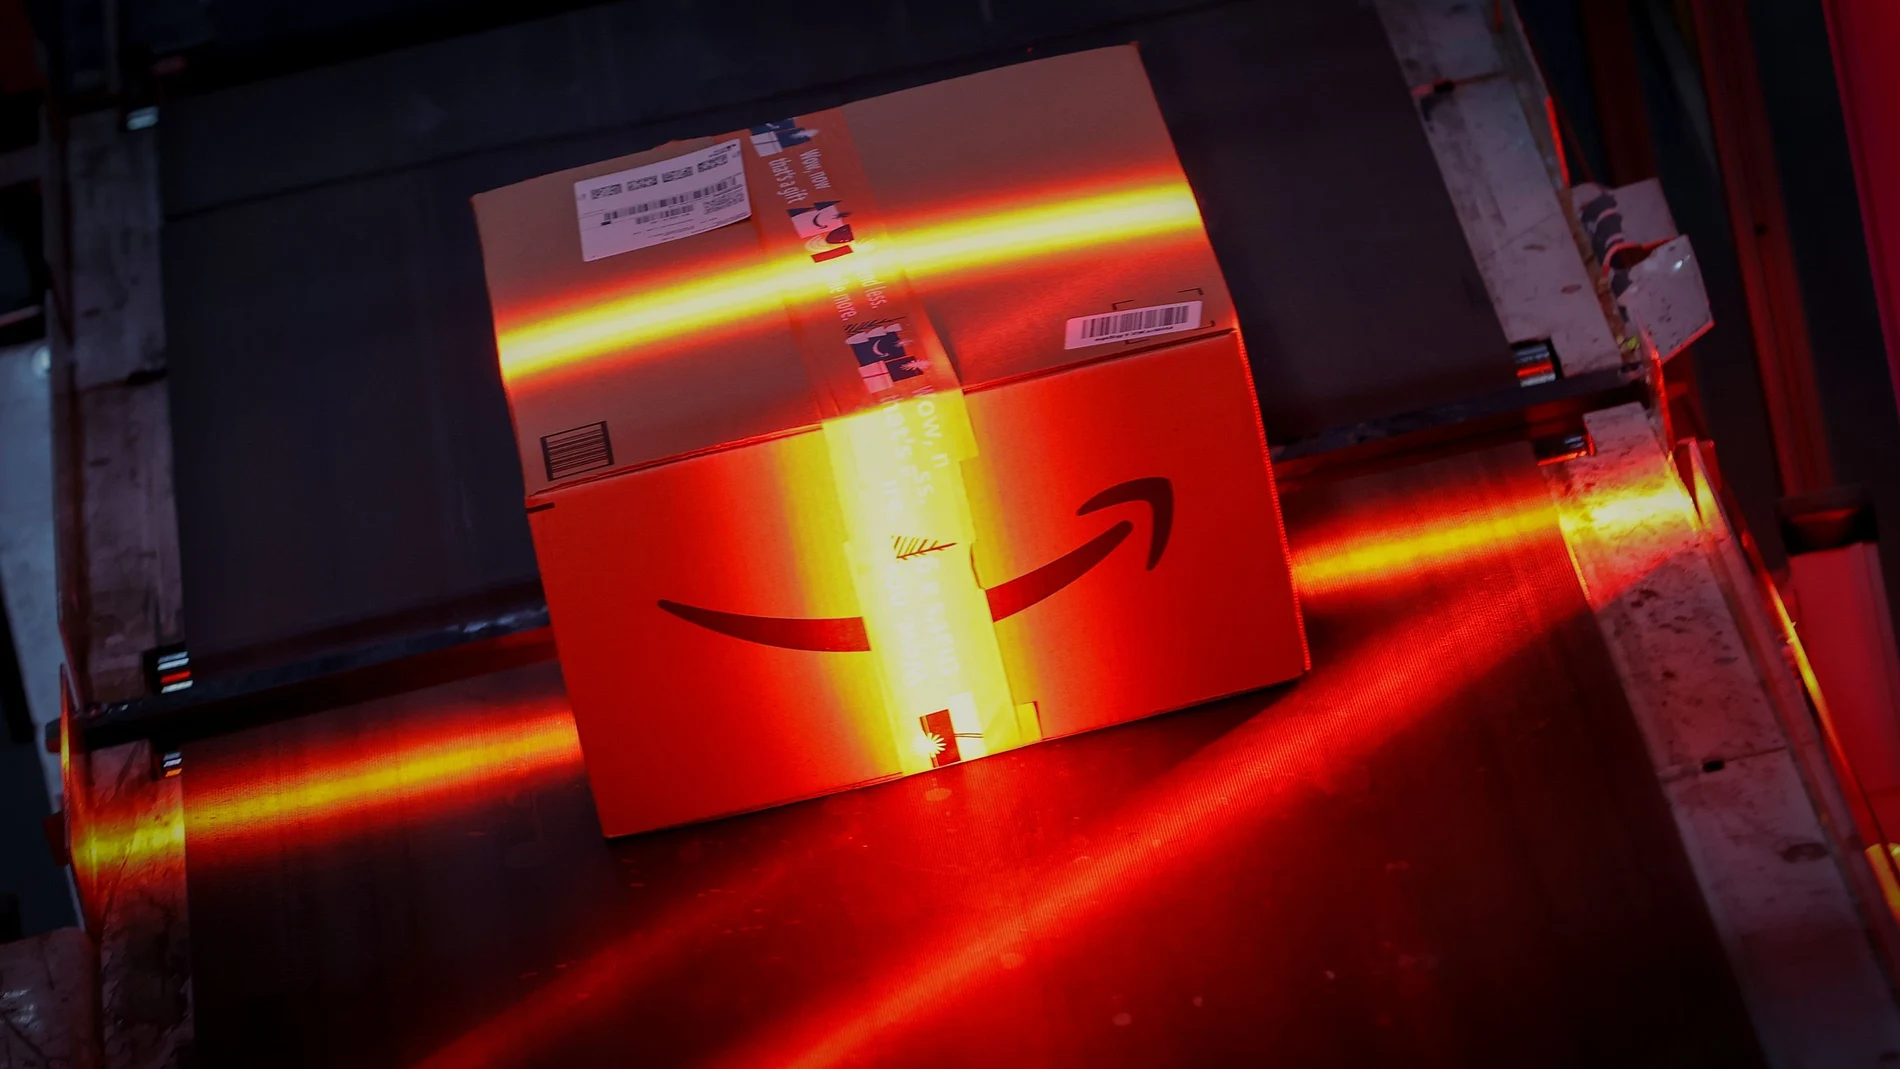 A fast-moving conveyor belt moves a package through a scanning machine on its way to a delivery truck during operations on Cyber Monday at Amazon's fulfillment center in Robbinsville, New Jersey, U.S., November 29, 2021. REUTERS/Mike Segar